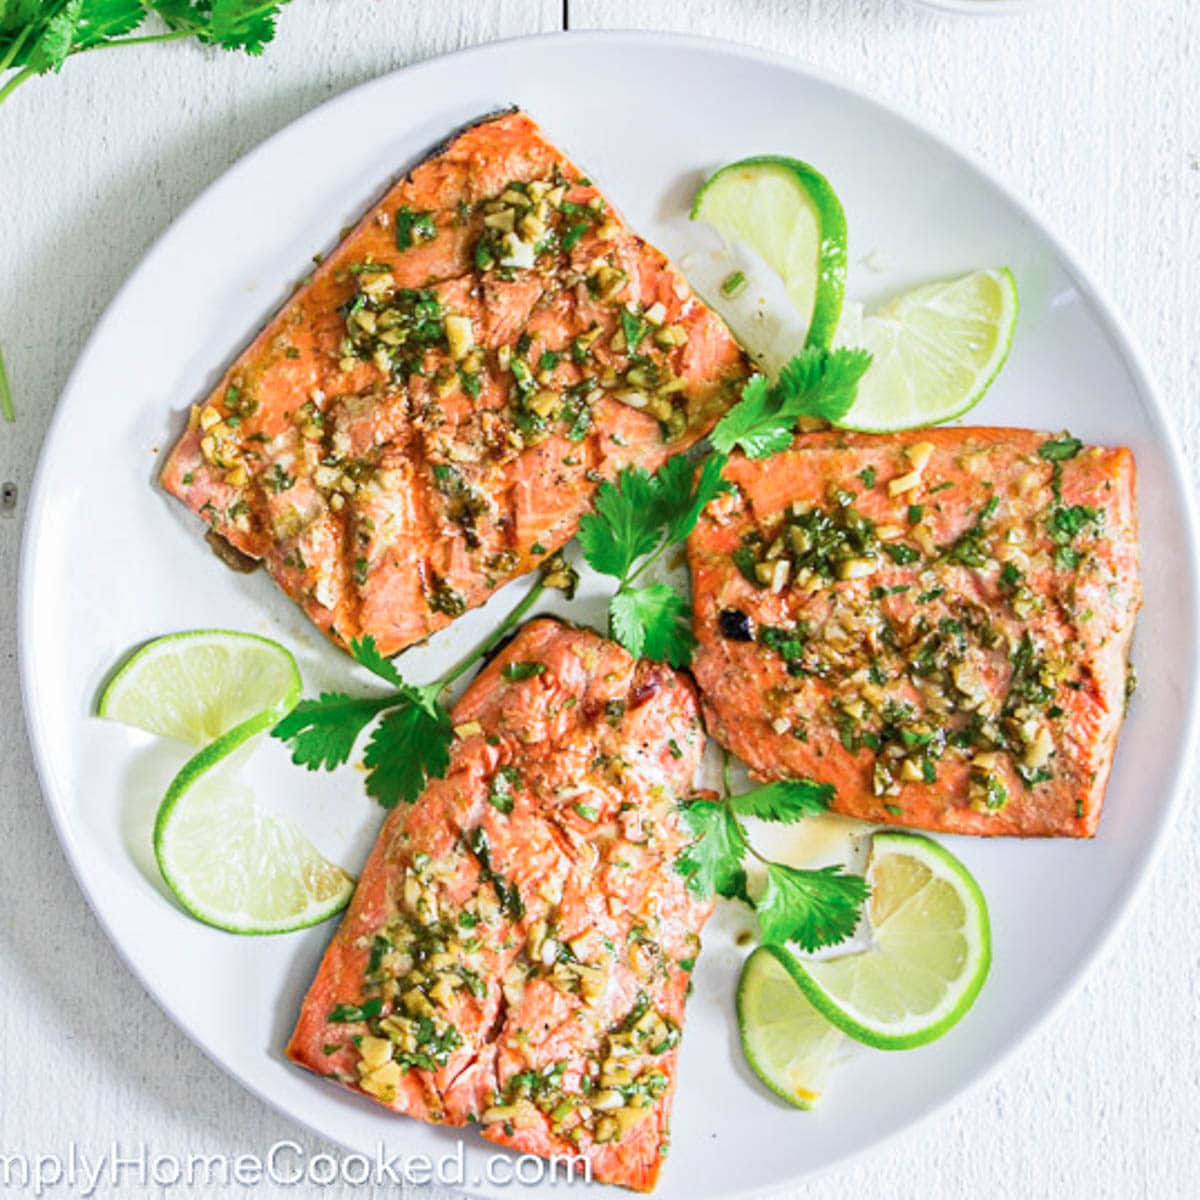 Cilantro Lime Salmon - Simply Home Cooked